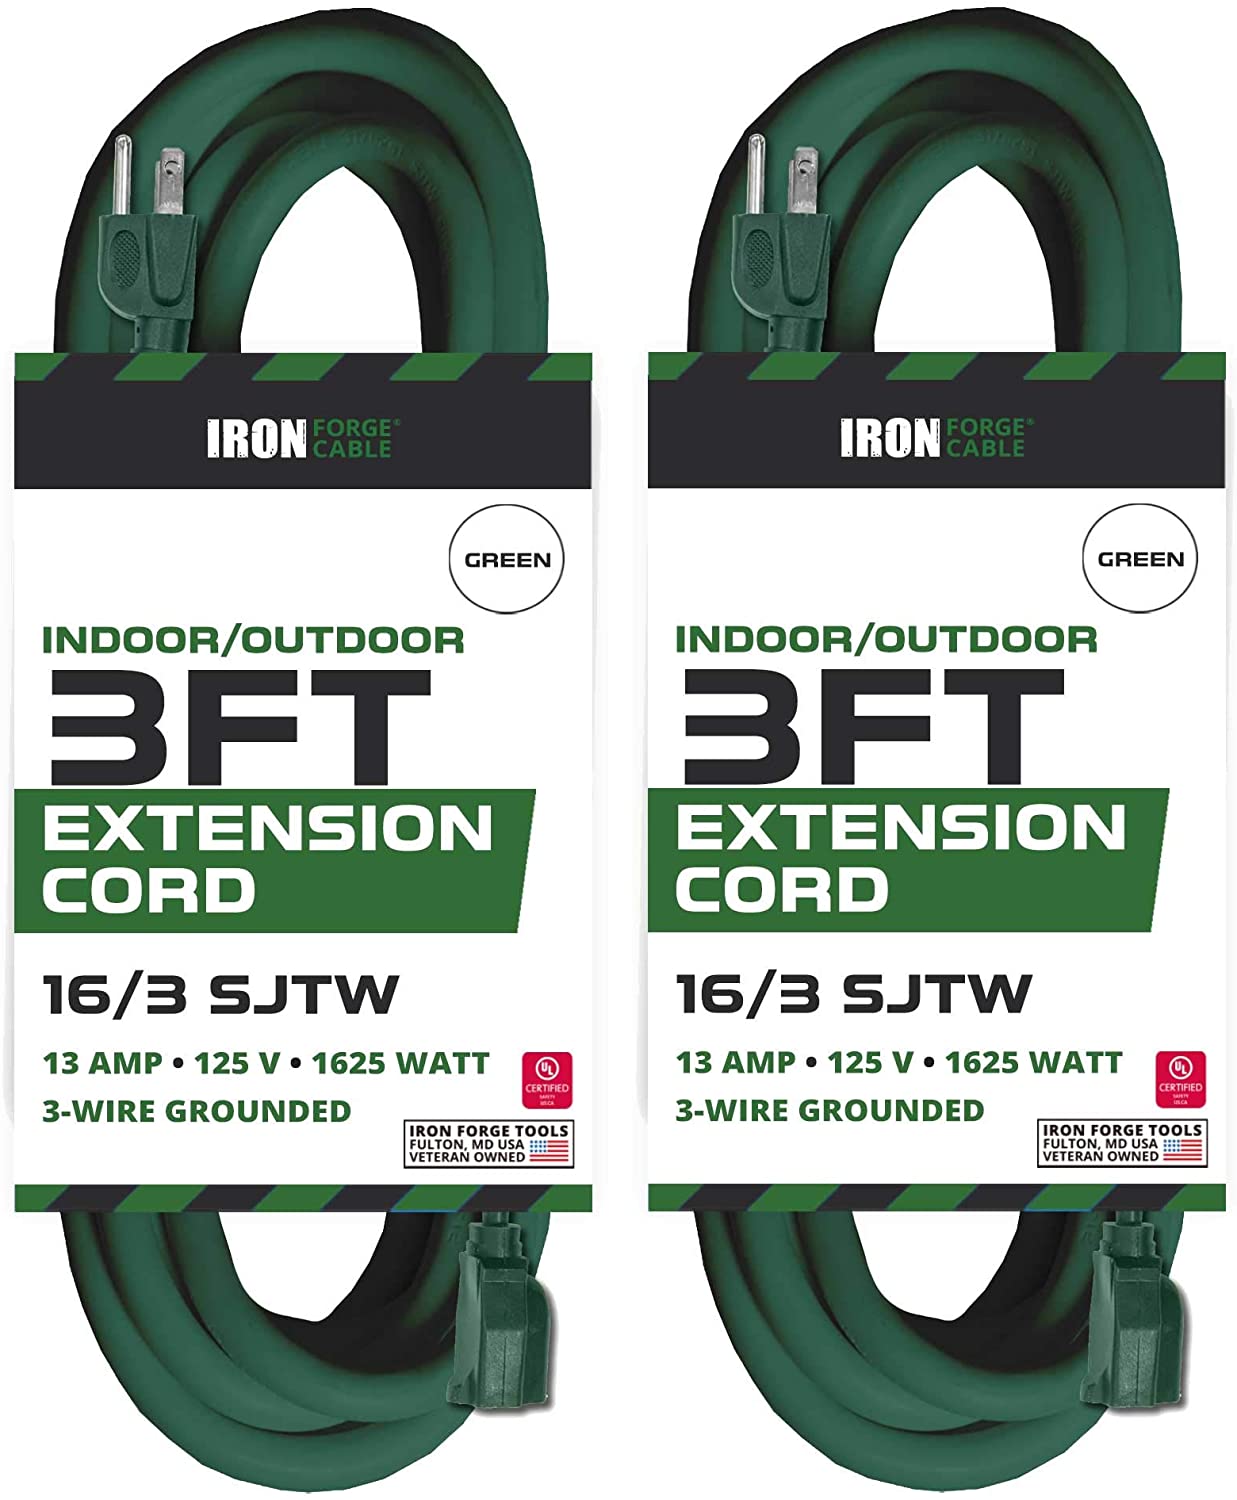 2 Pack of 3 Ft Green Extension Cords - 16/3 SJTW Durable Electrical Cable Set